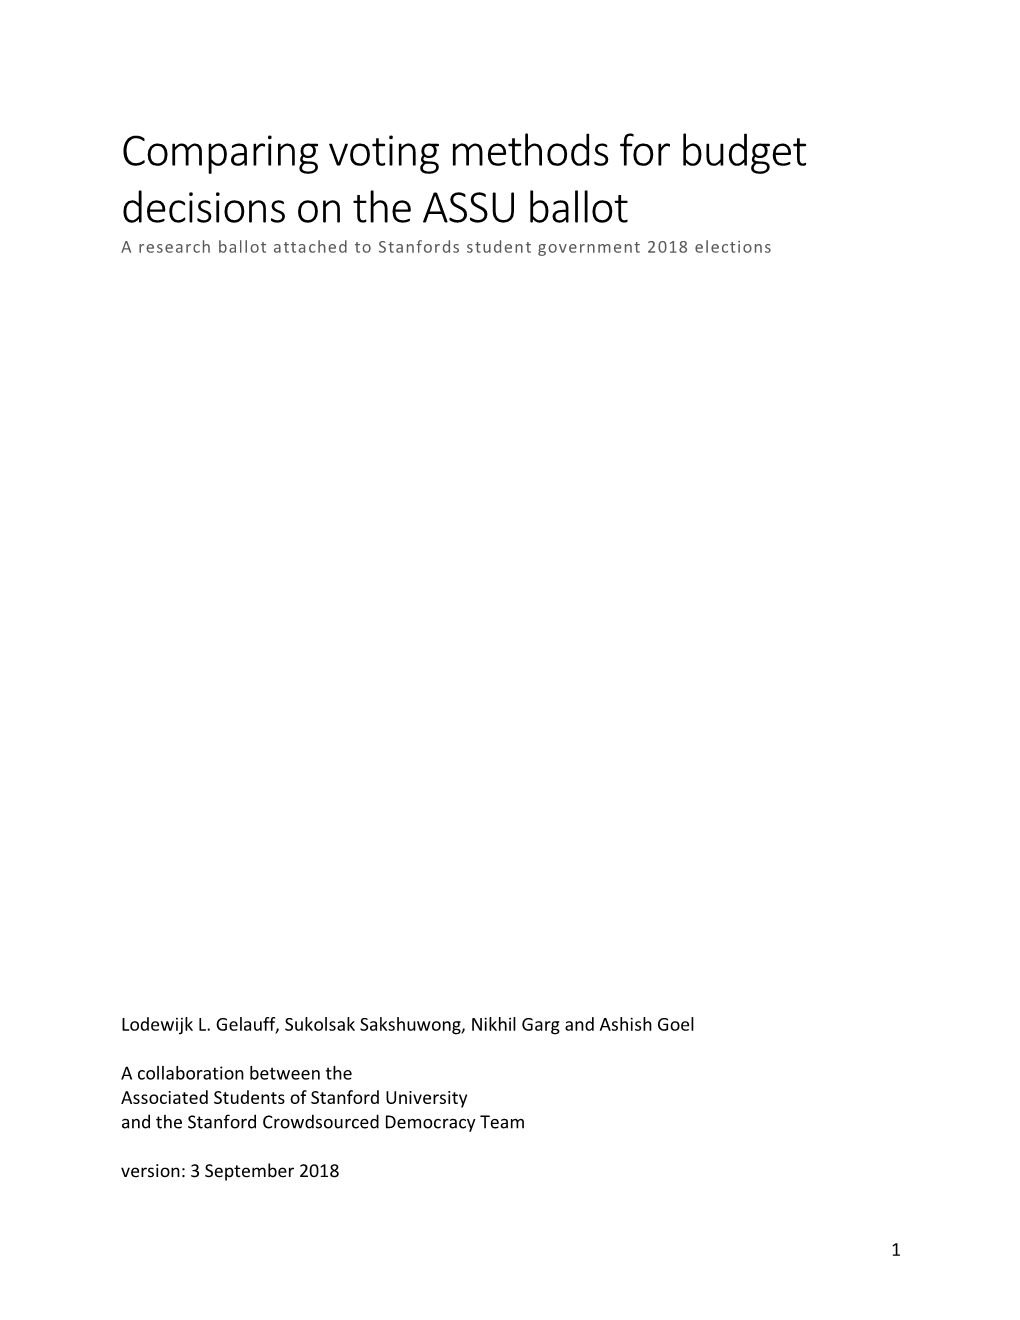 Comparing Voting Methods for Budget Decisions on the ASSU Ballot a Research Ballot Attached to Stanfords Student Government 2018 Elections